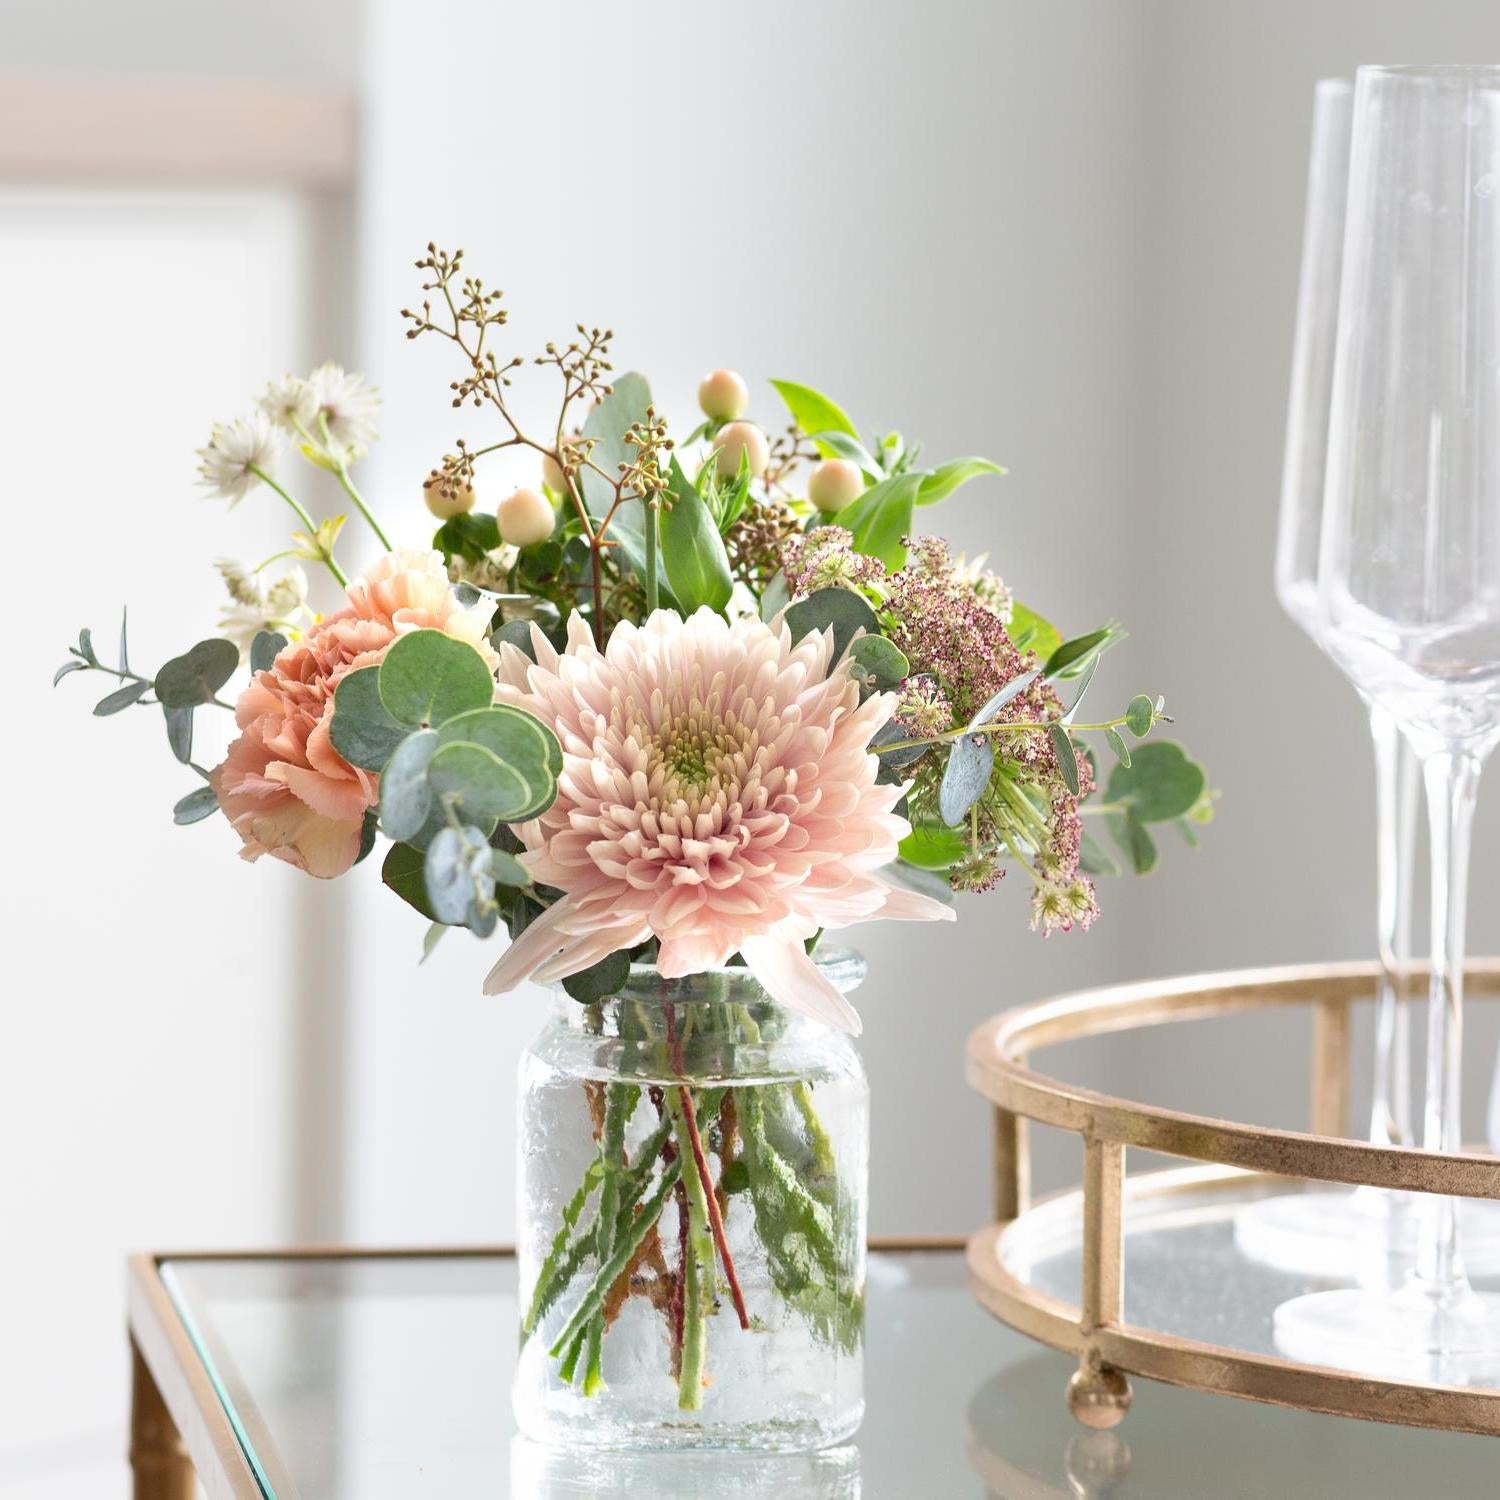 Elegant floral arrangement featuring peach roses, blush chrysanthemums, and assorted greenery in a clear hammered glass jar vase, on a modern glass table beside an empty crystal champagne flute, with a wooden serving tray in soft focus in the background.